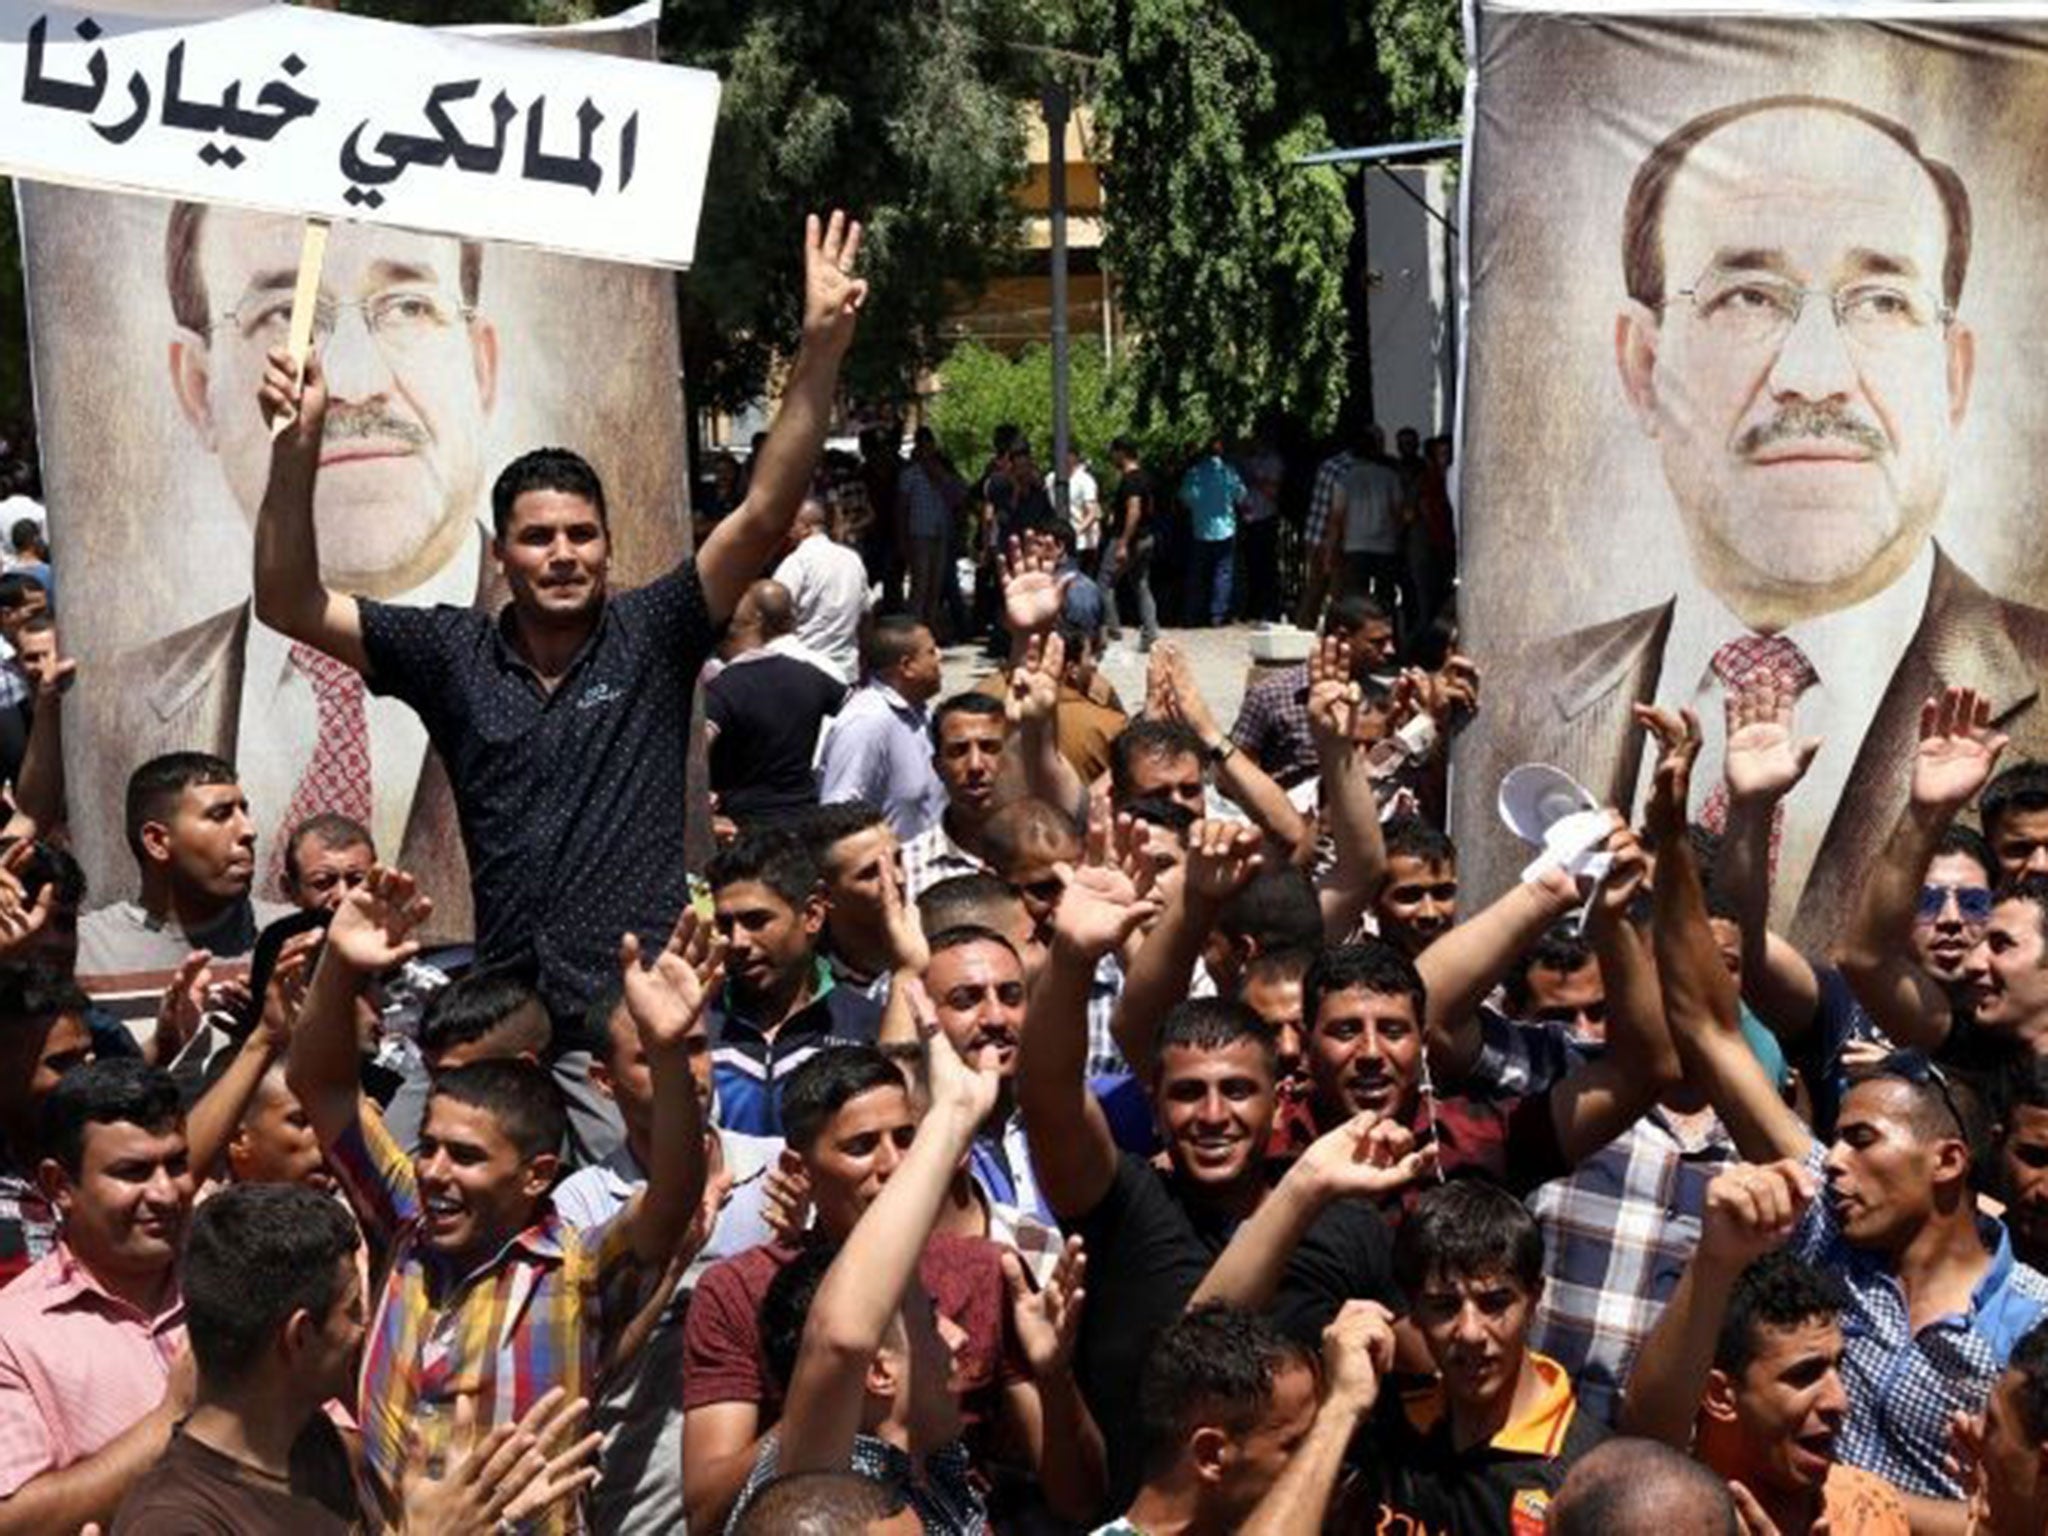 Supporters of Nouri al-Maliki in Baghdad yesterday